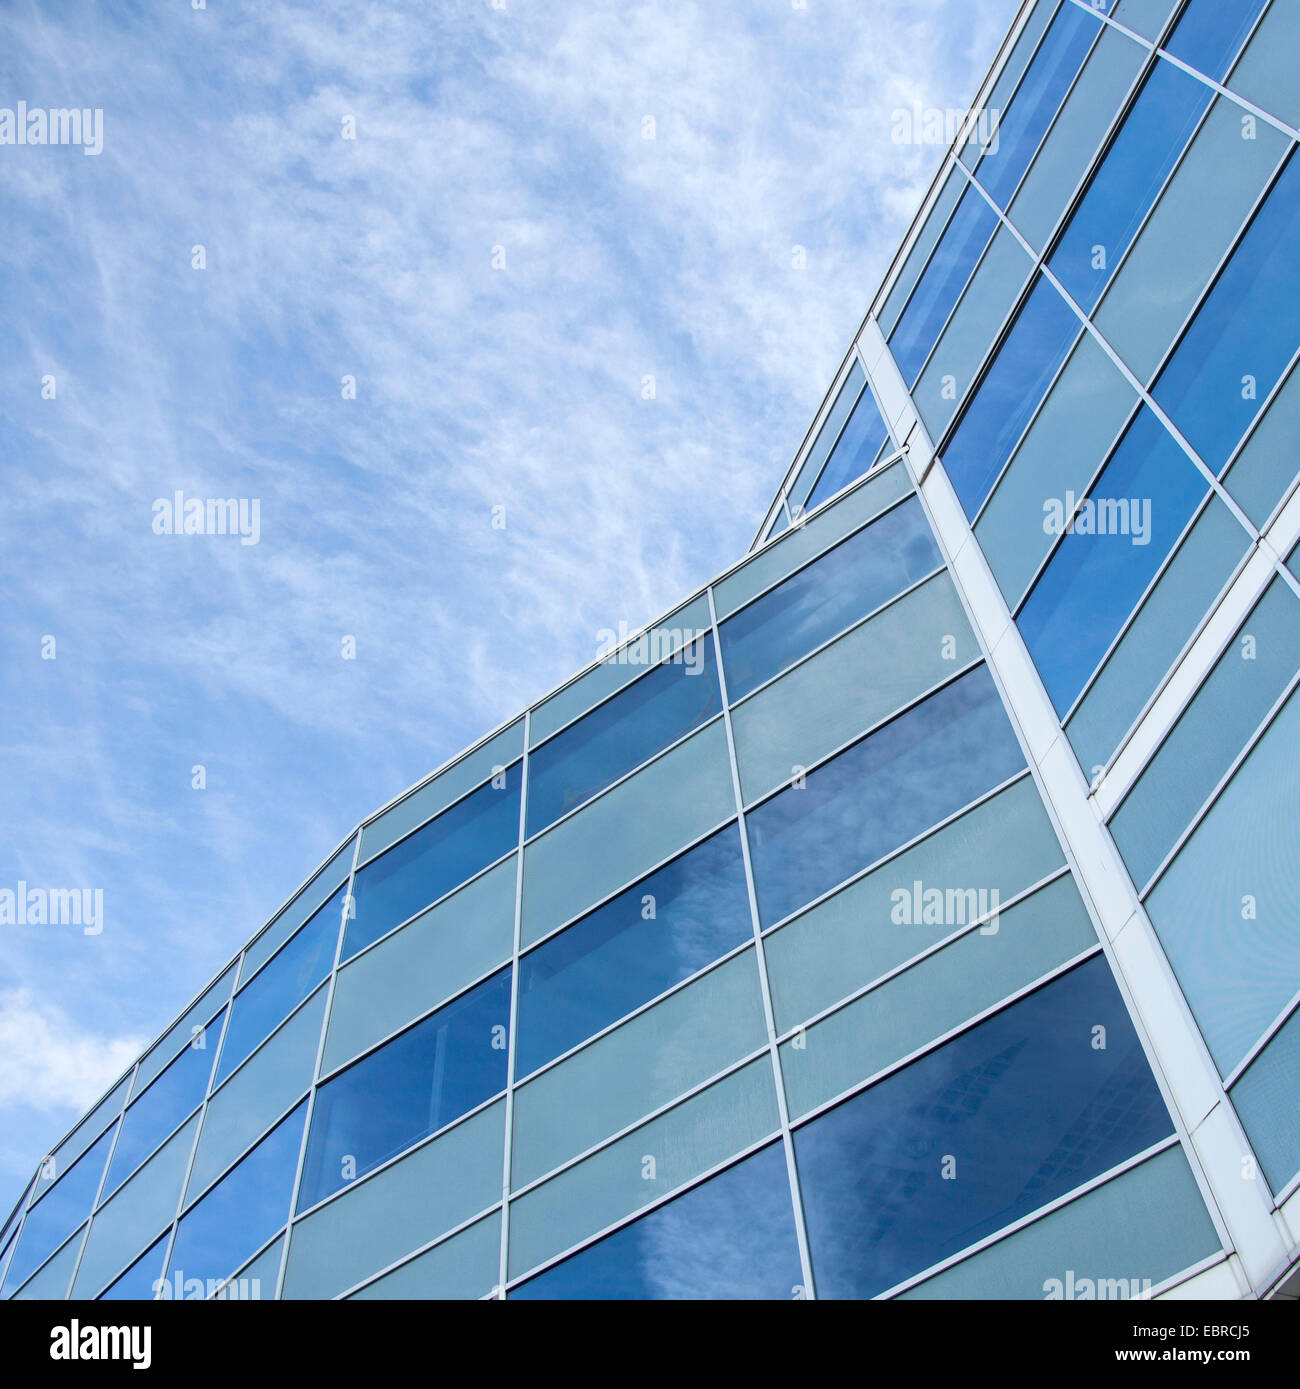 facade of glass and steel with reflections of blue sky and clouds Stock Photo